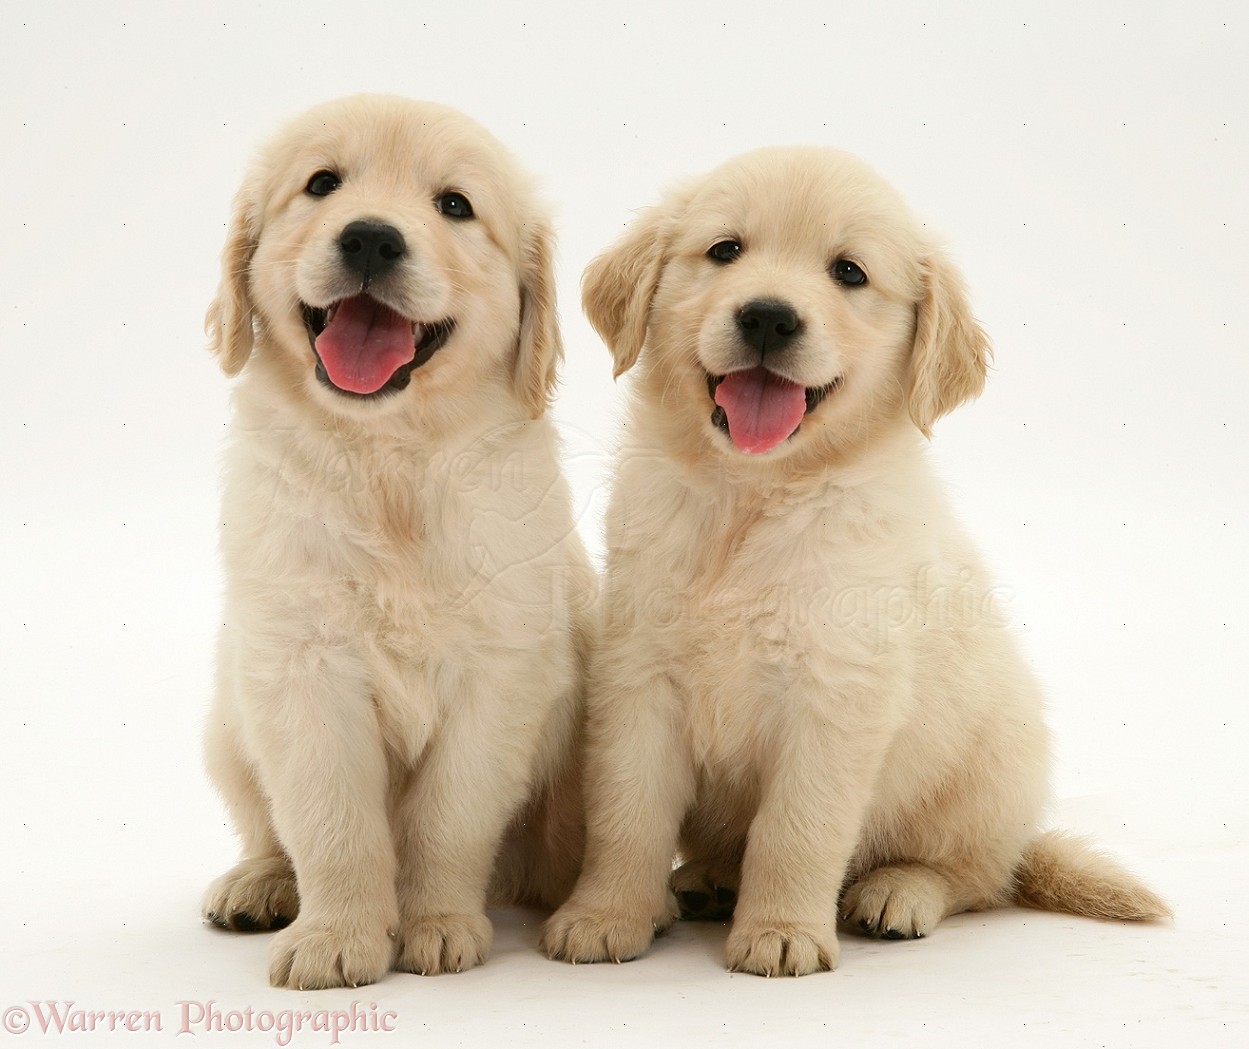 WP14084 Two Golden Retriever pups sitting.